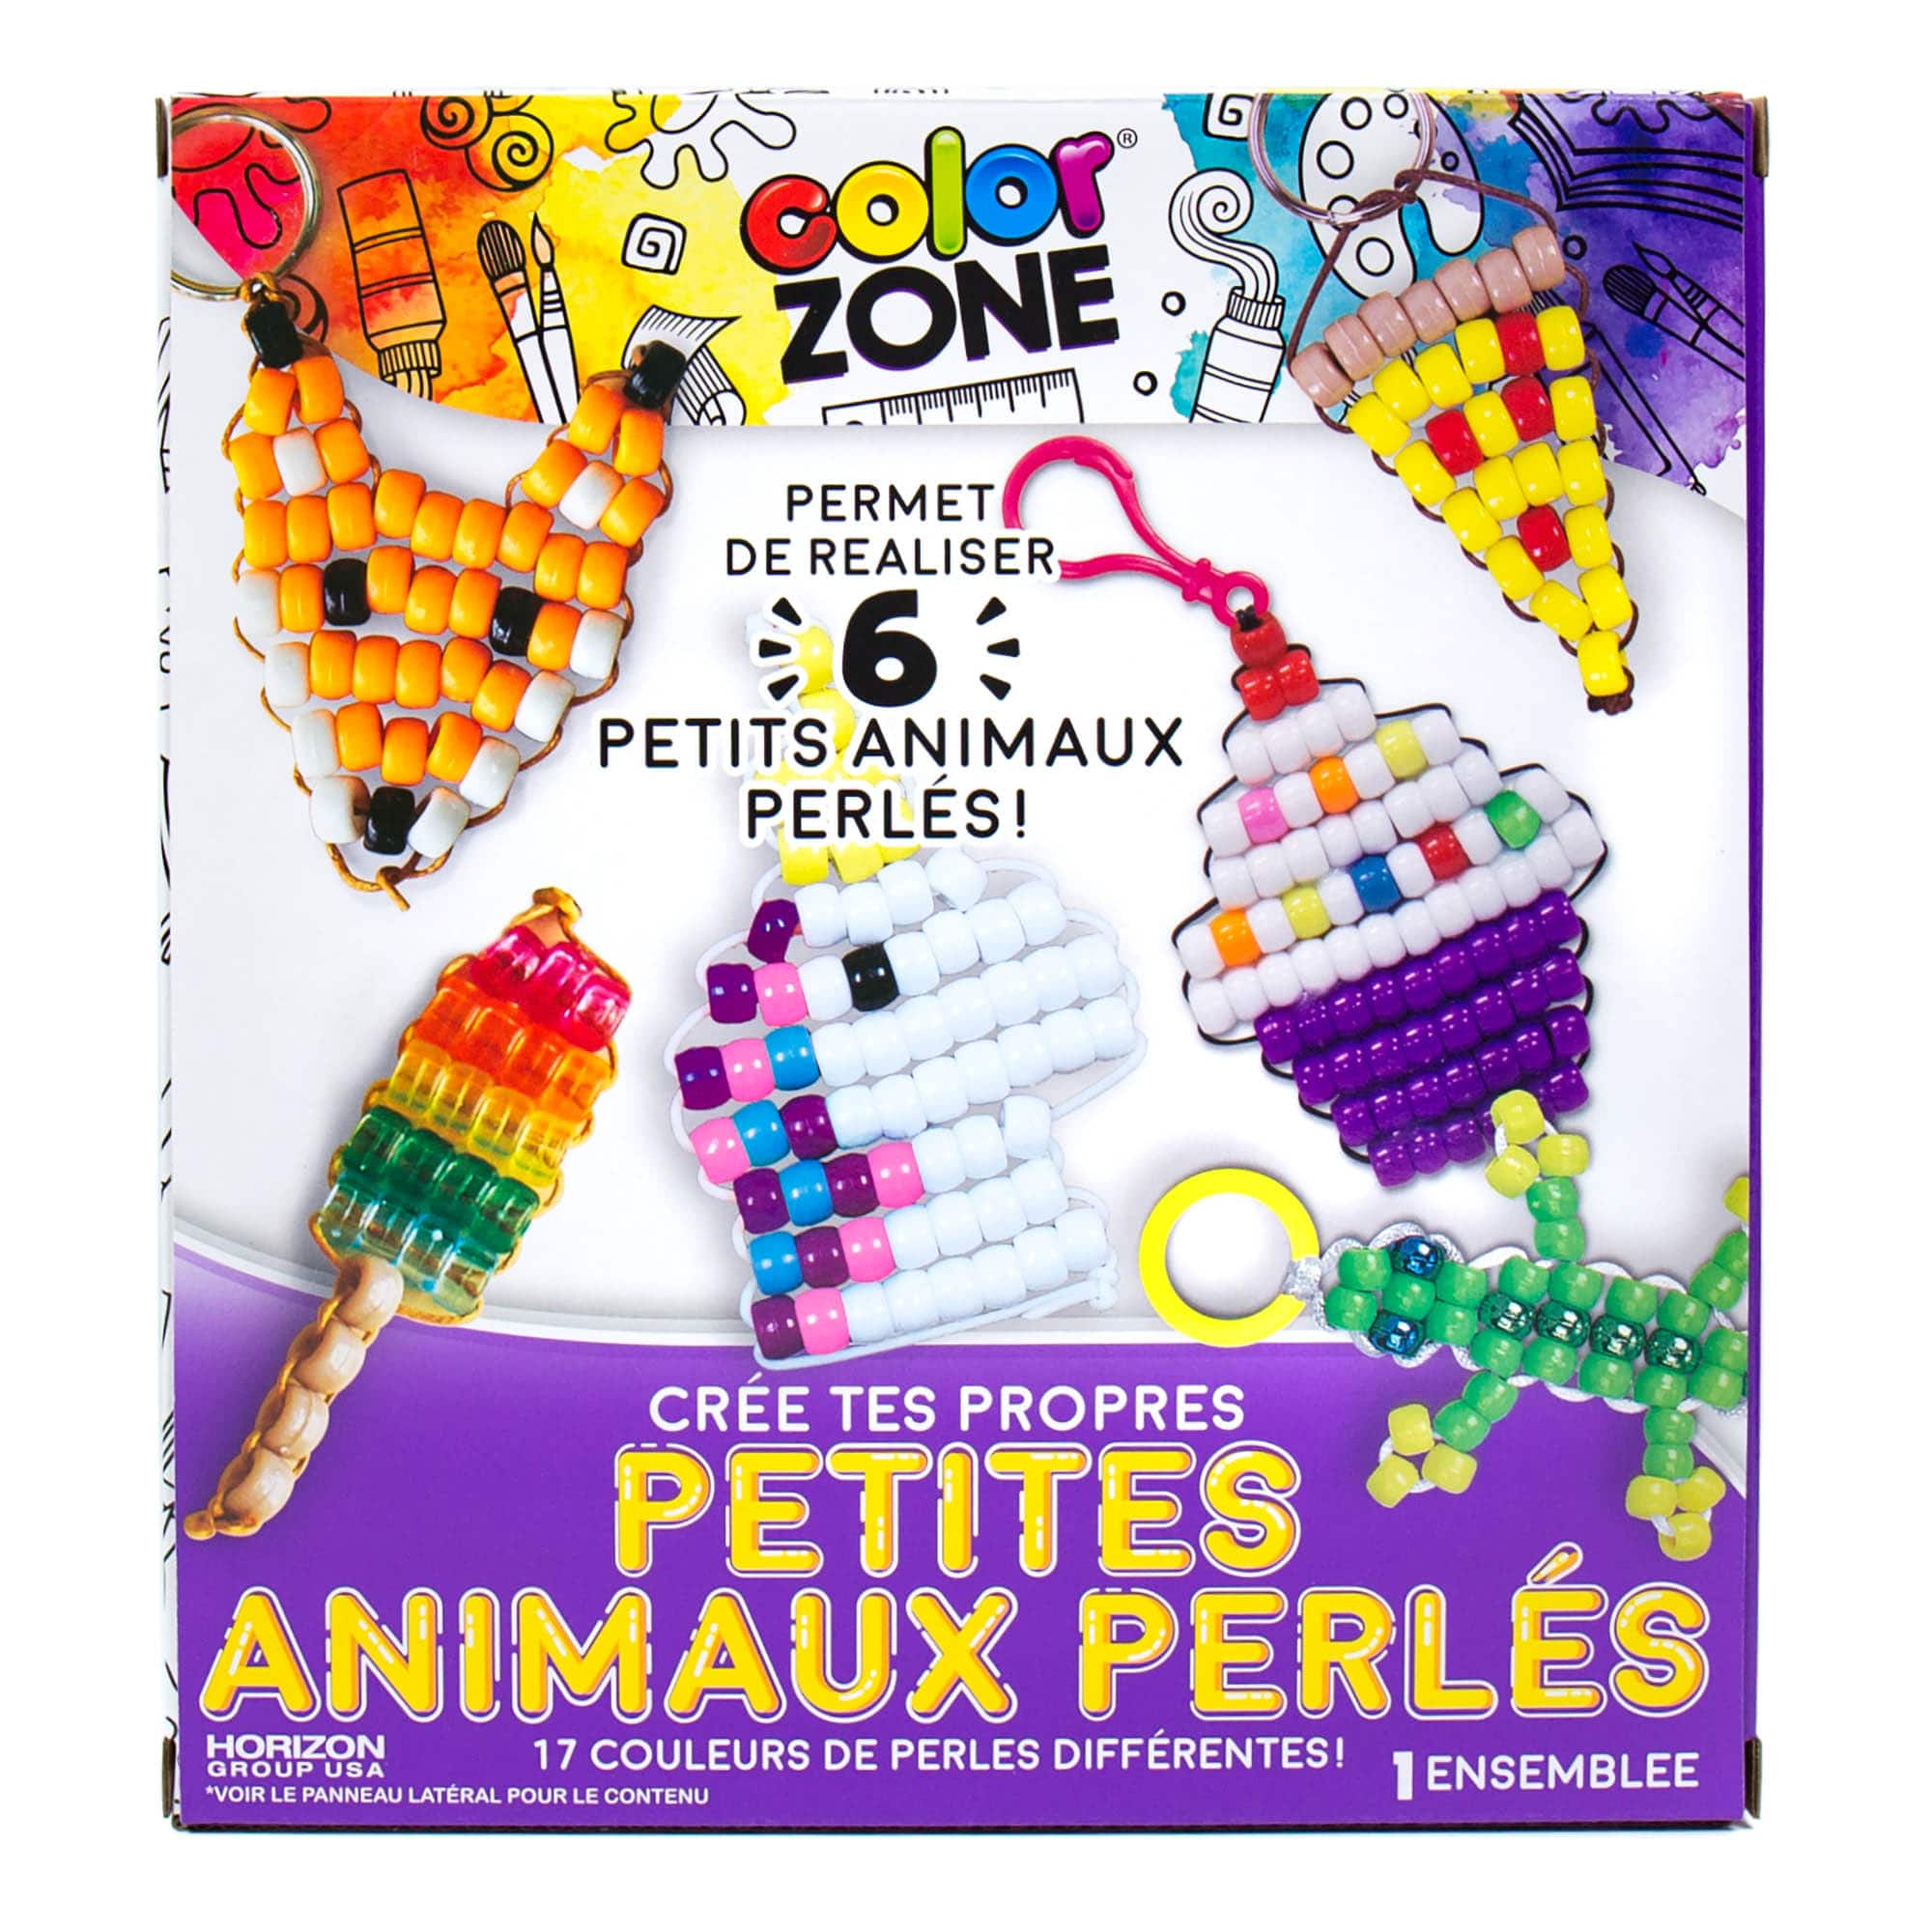 Mine 2 Design® Create Your Own Bead Pets at Menards®